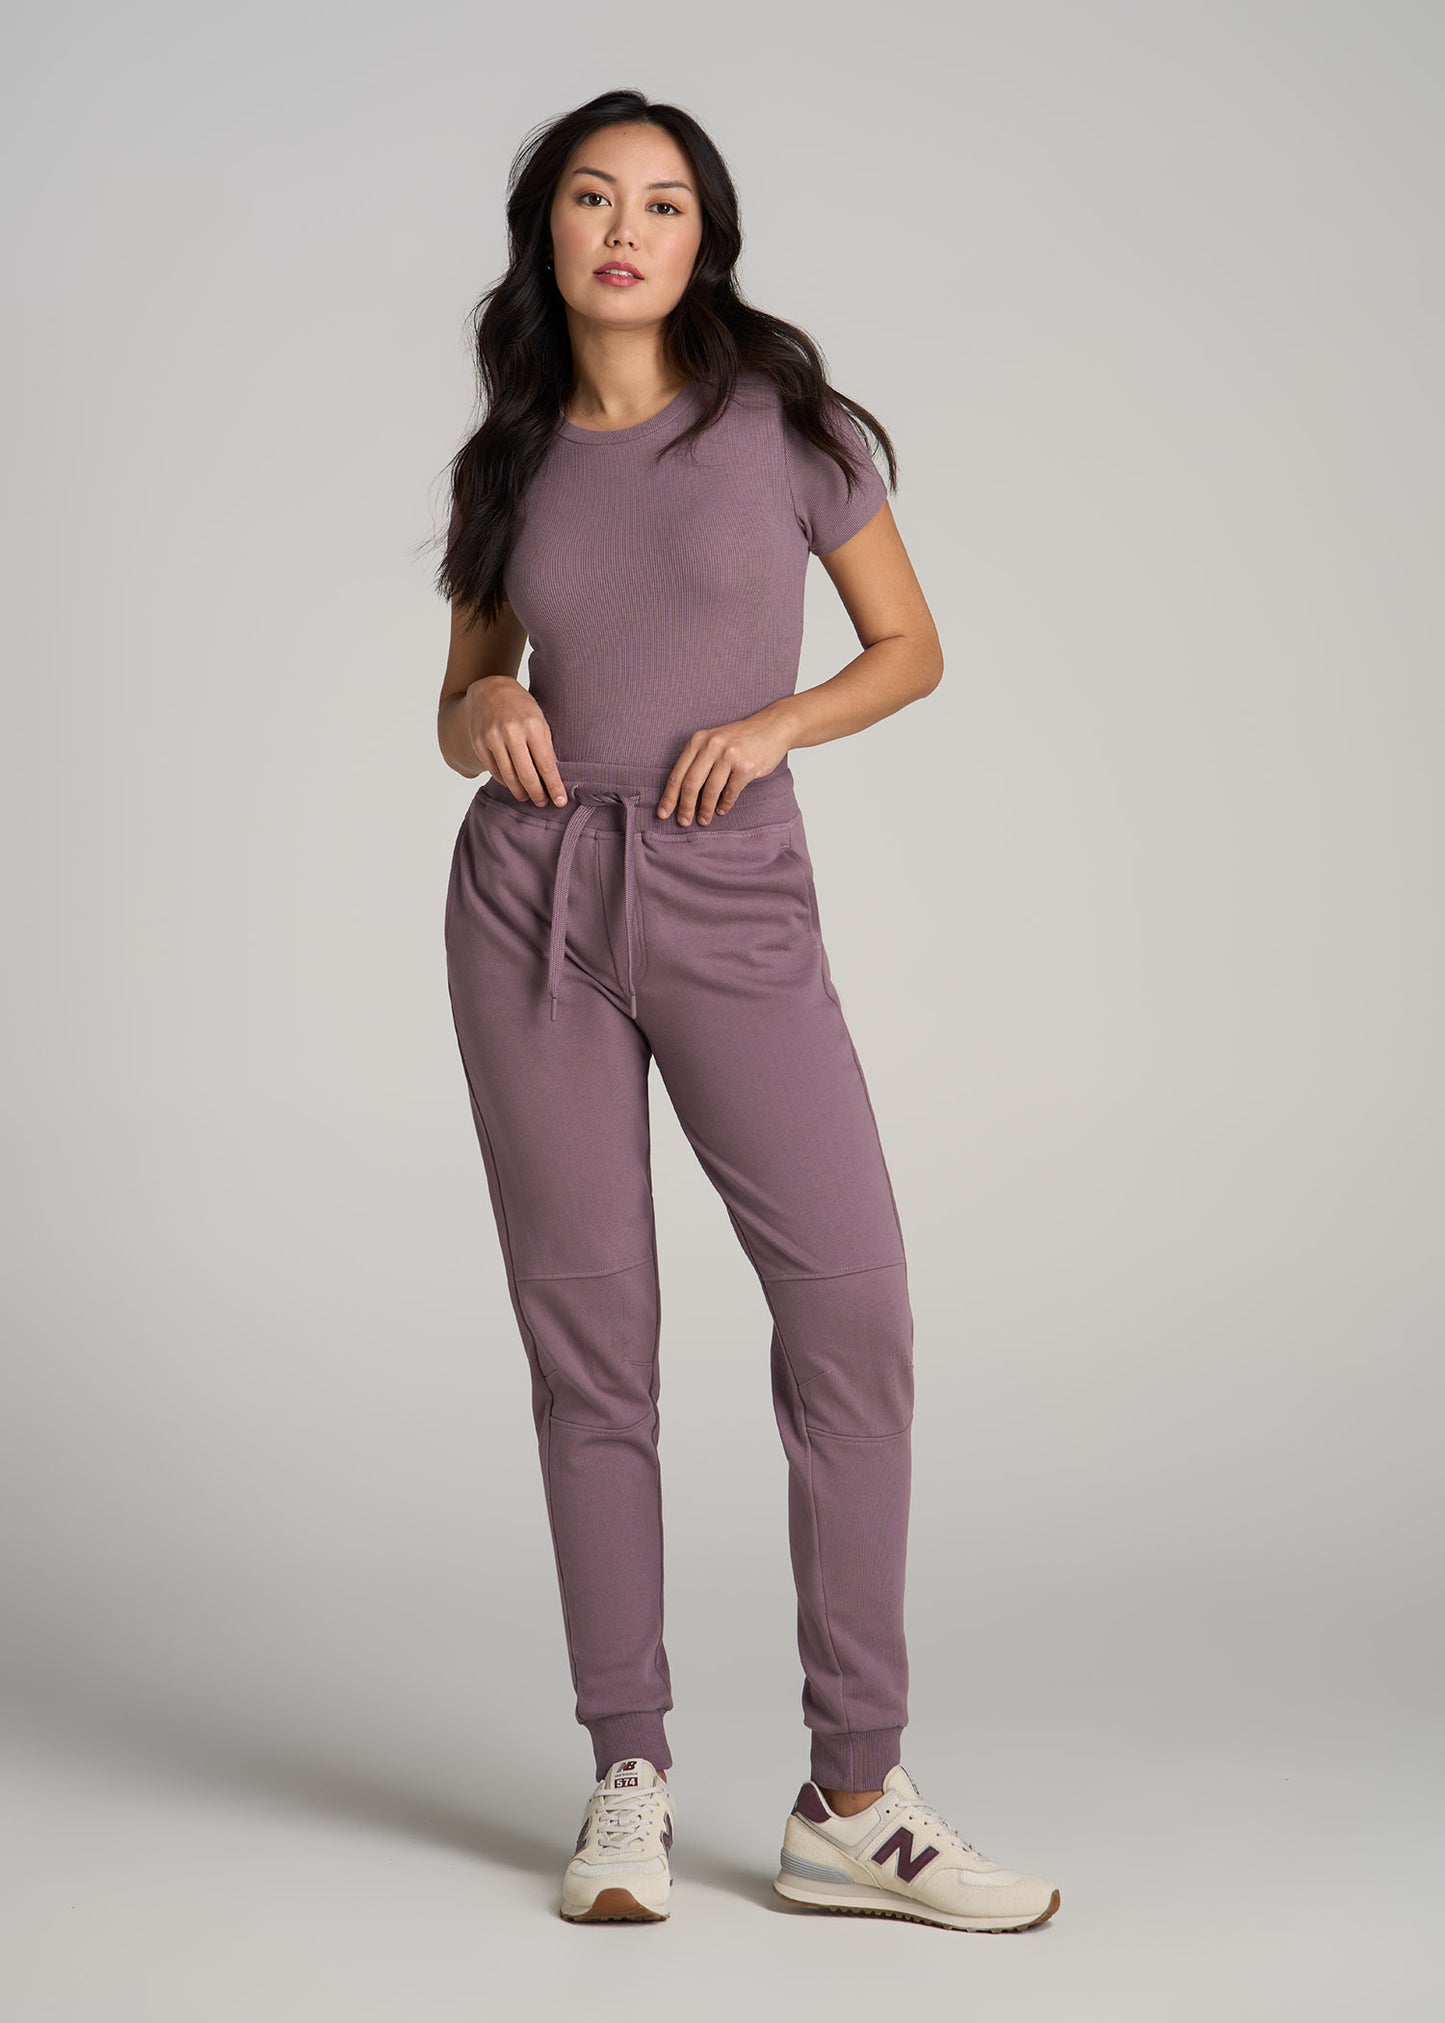 Wearever French Terry Tall Women's Joggers in Smoked Mauve